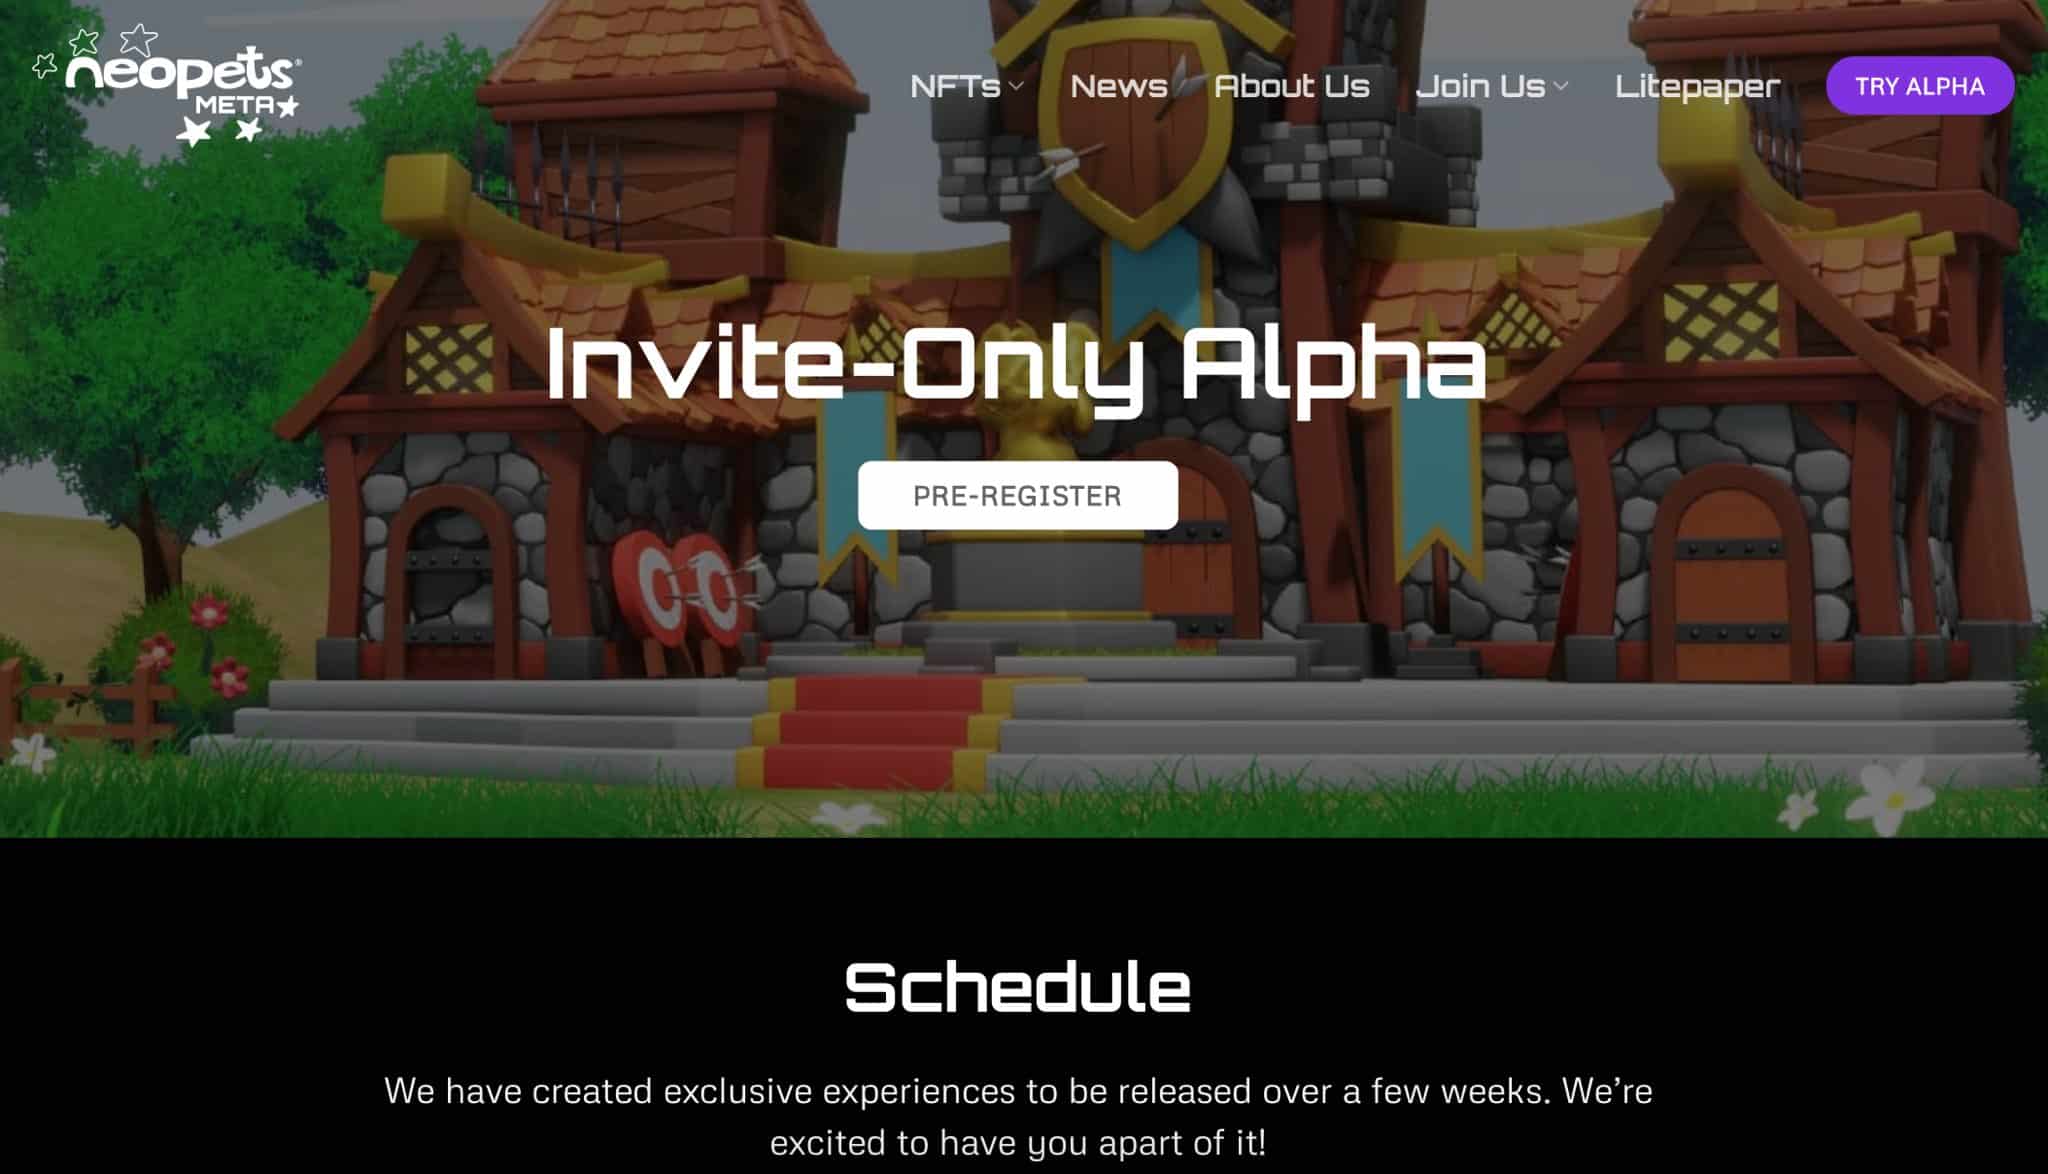 A screenshot of the invite-only alpha version